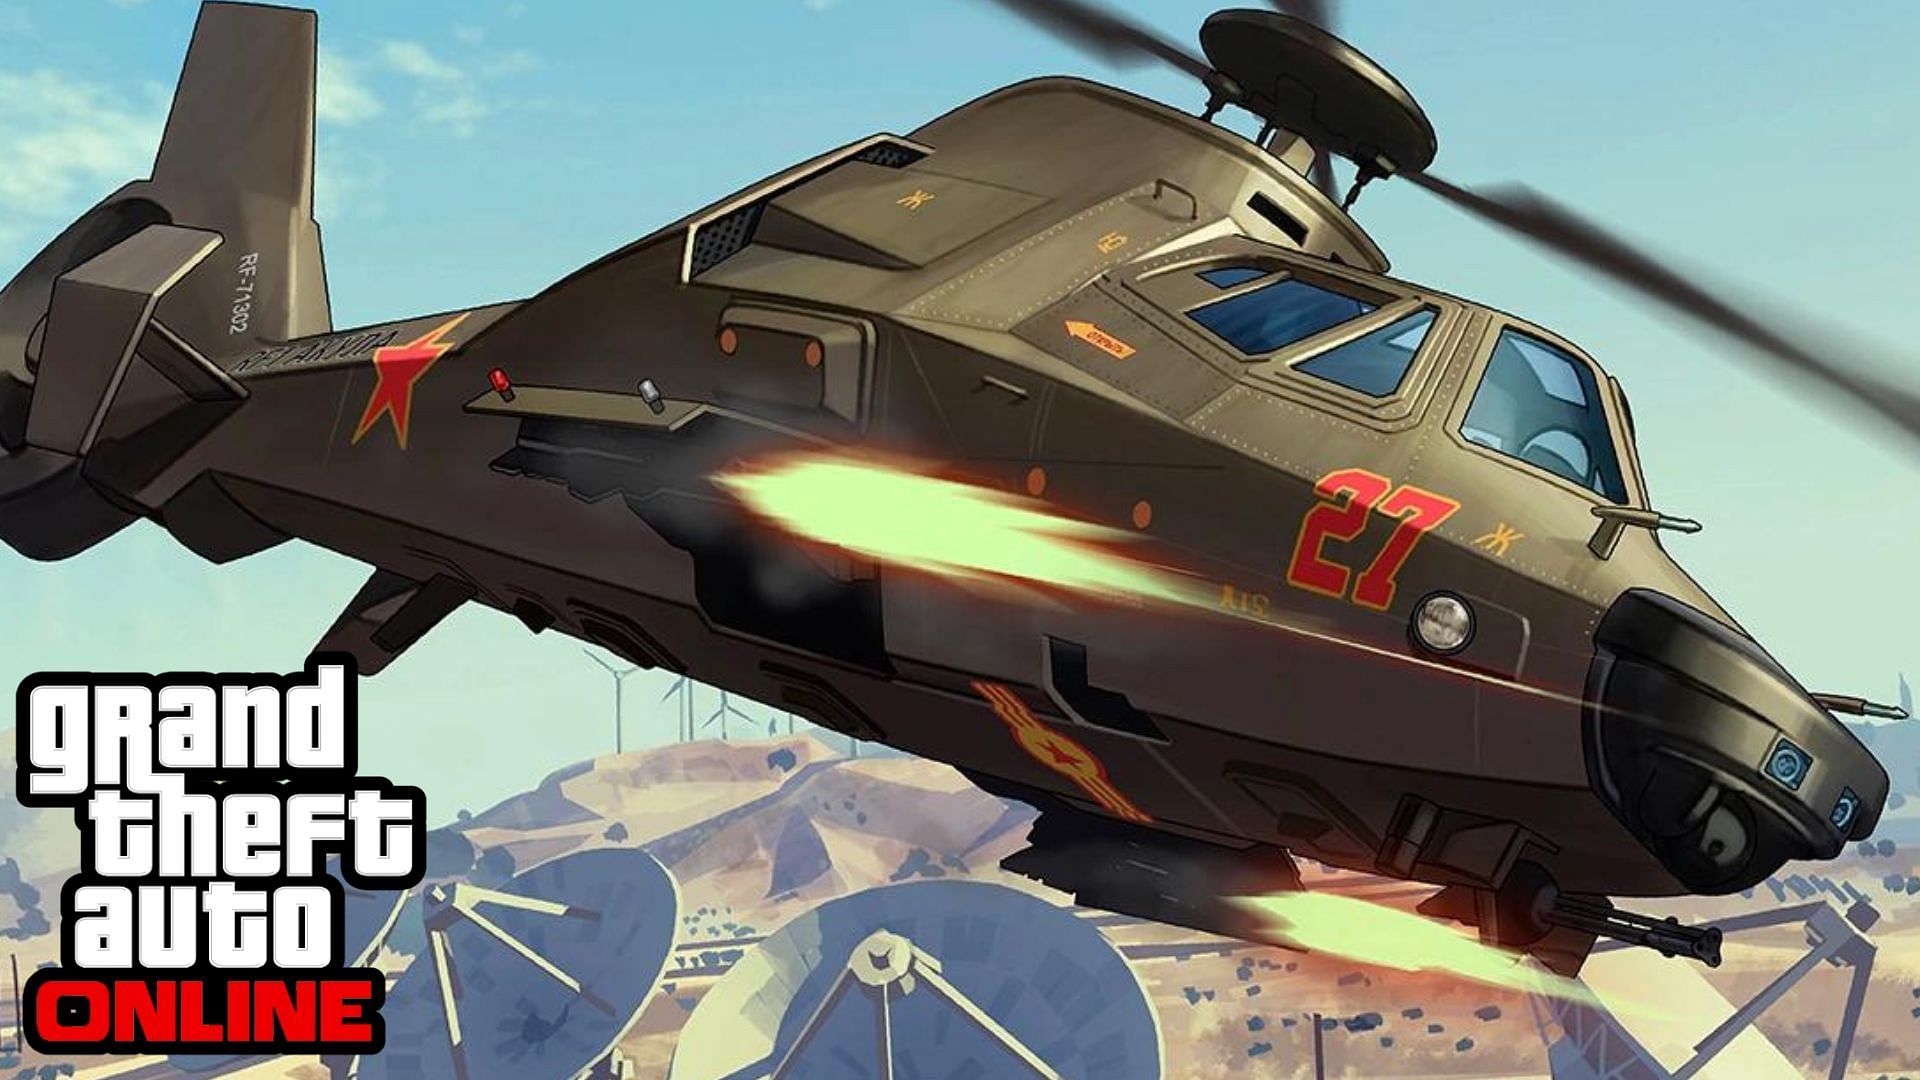 helicopters in GTA Online